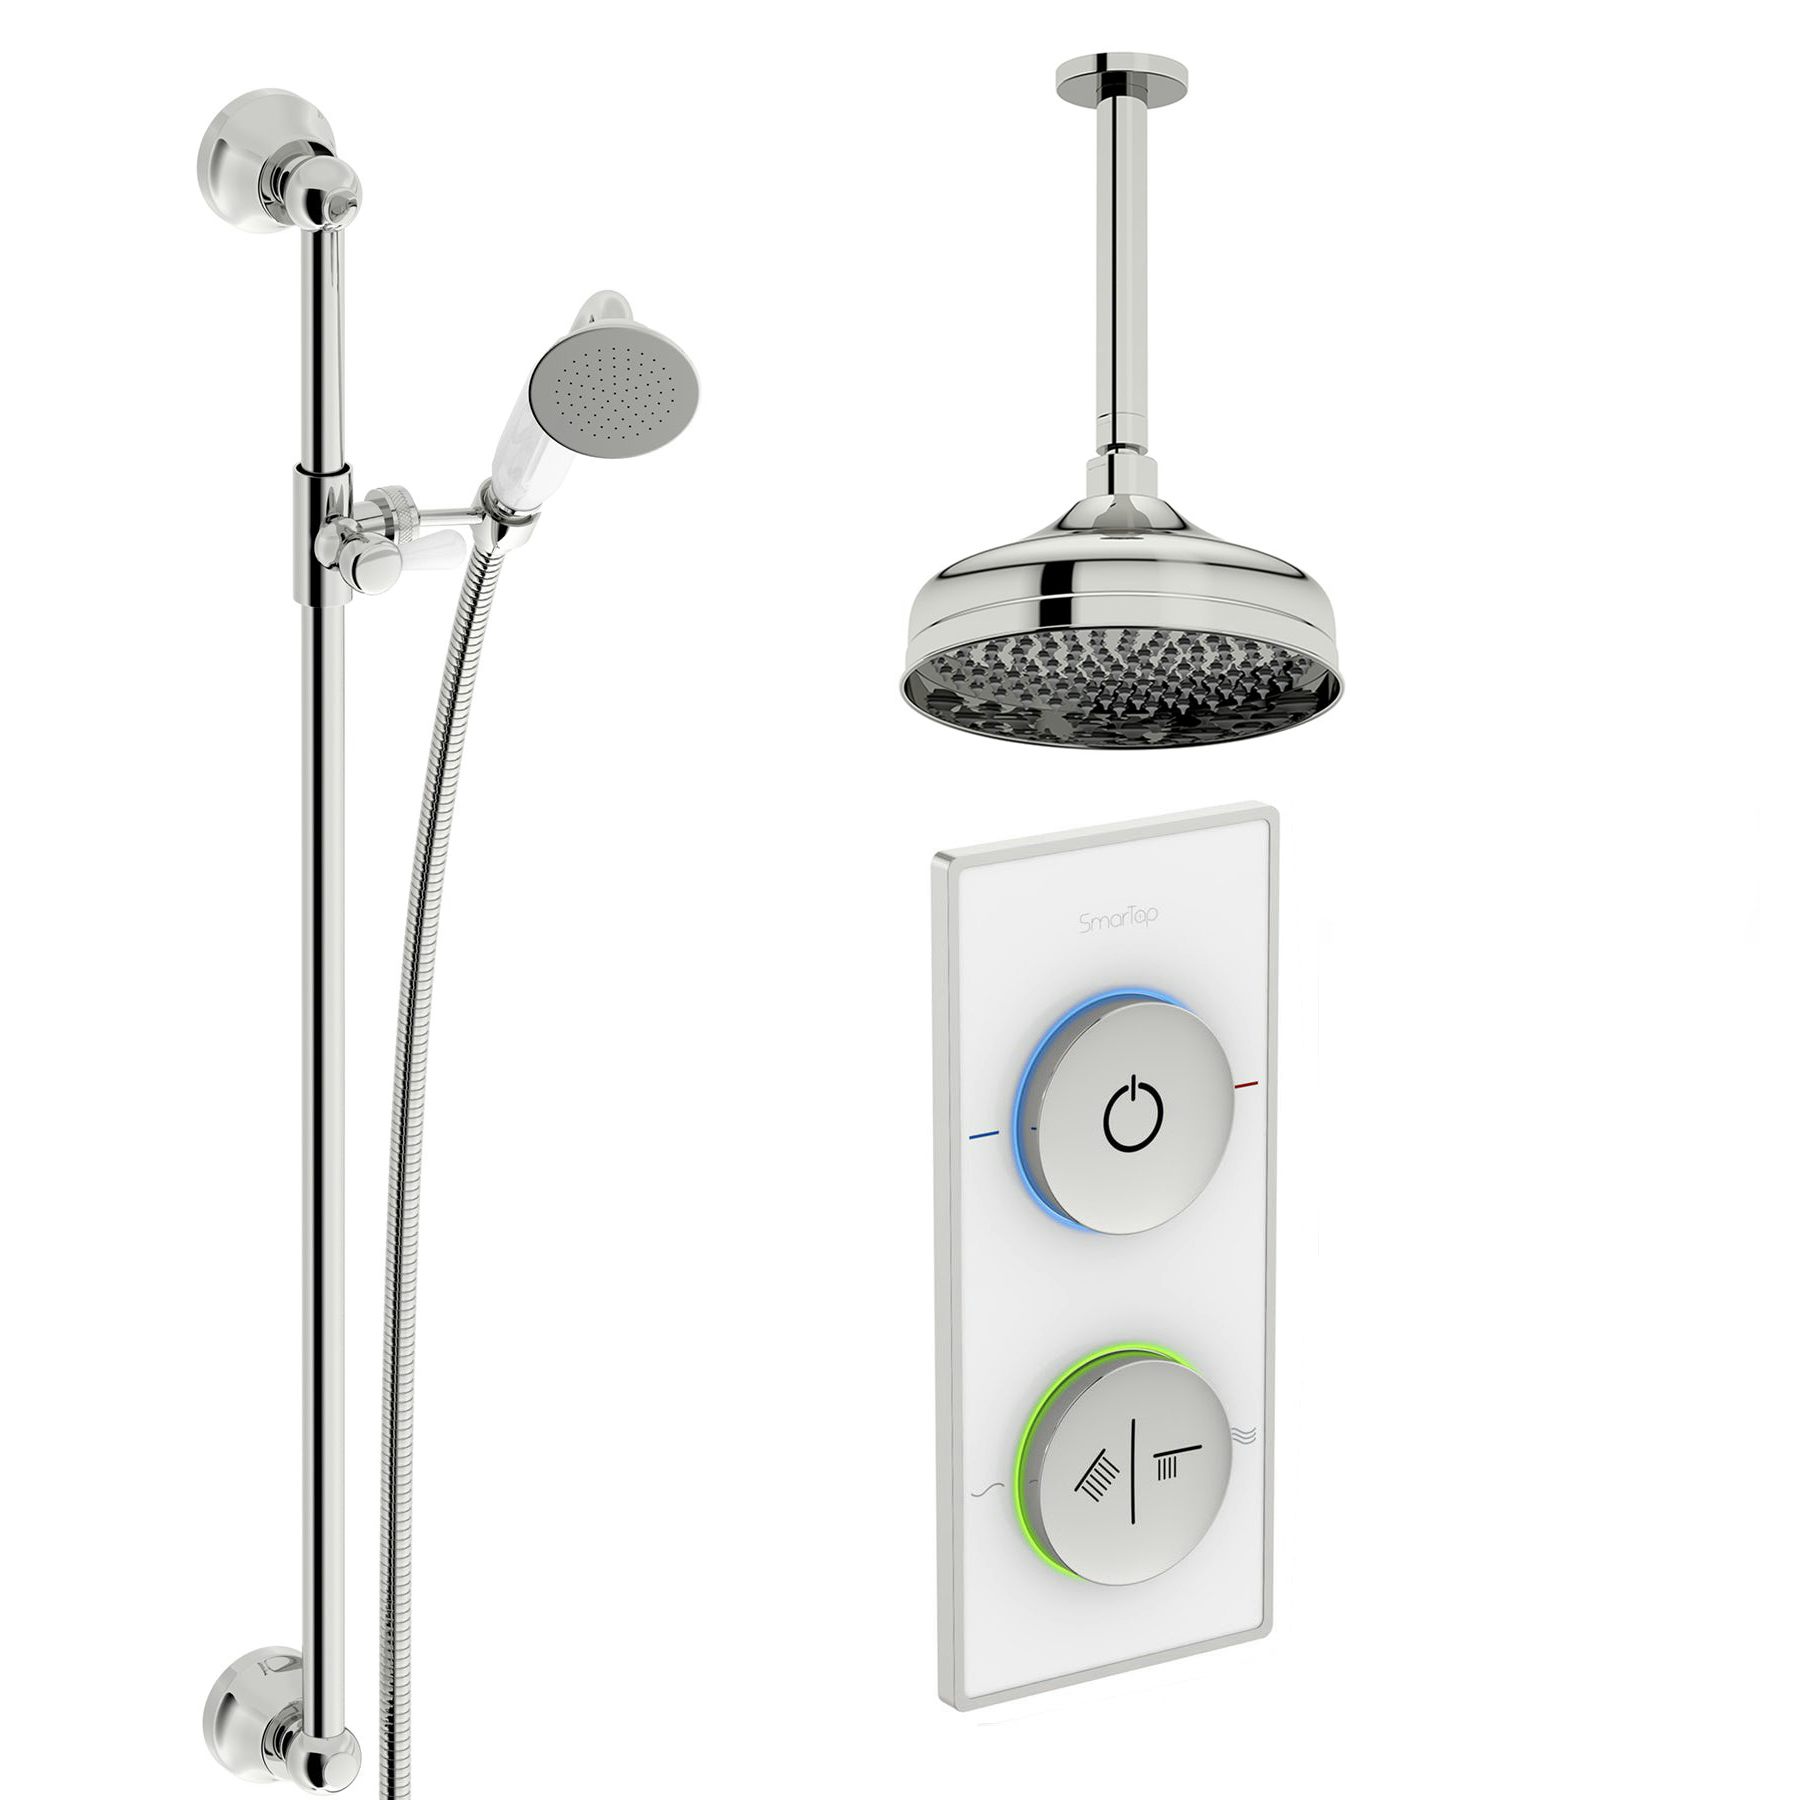 SmarTap white smart shower system with traditional slider rail and ceiling shower set